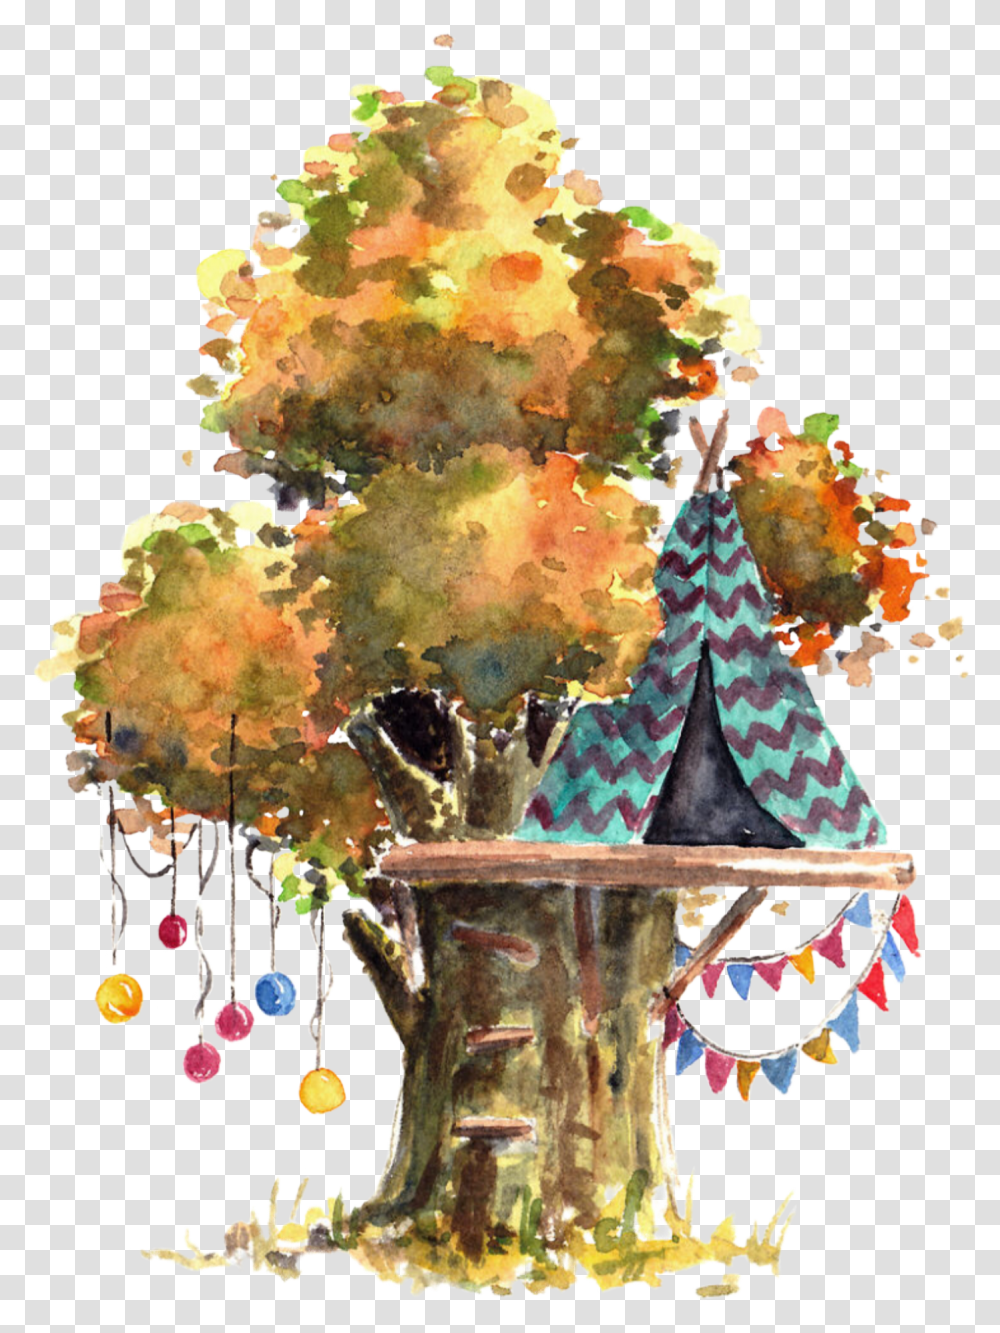 Watercolor Treehouse Teepee Balloons Tree Leaves Treehouse Watercolor, Pattern, Ornament Transparent Png